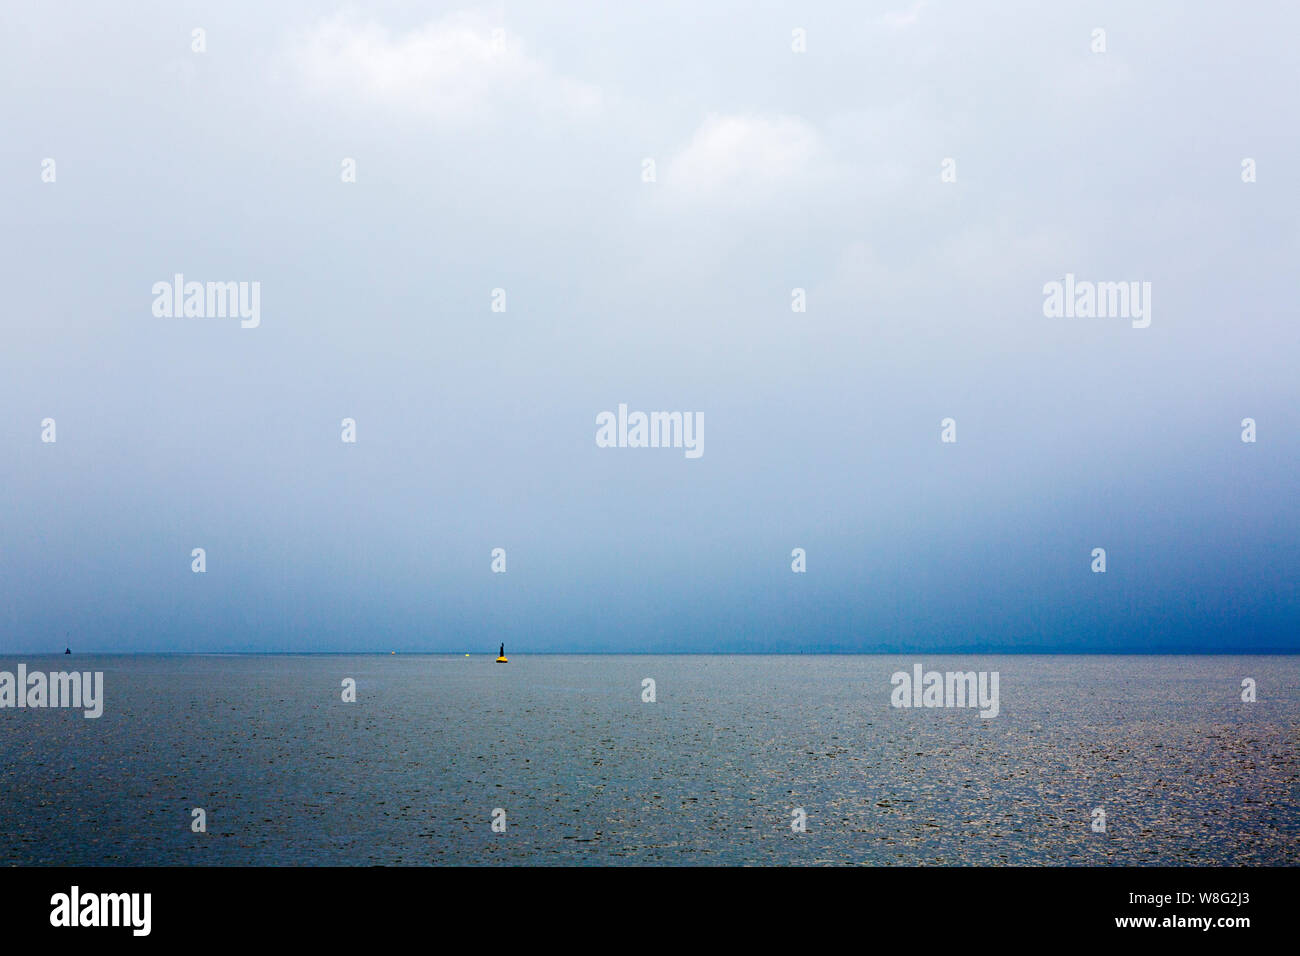 Tonne Wasser High Resolution Stock Photography and Images - Alamy